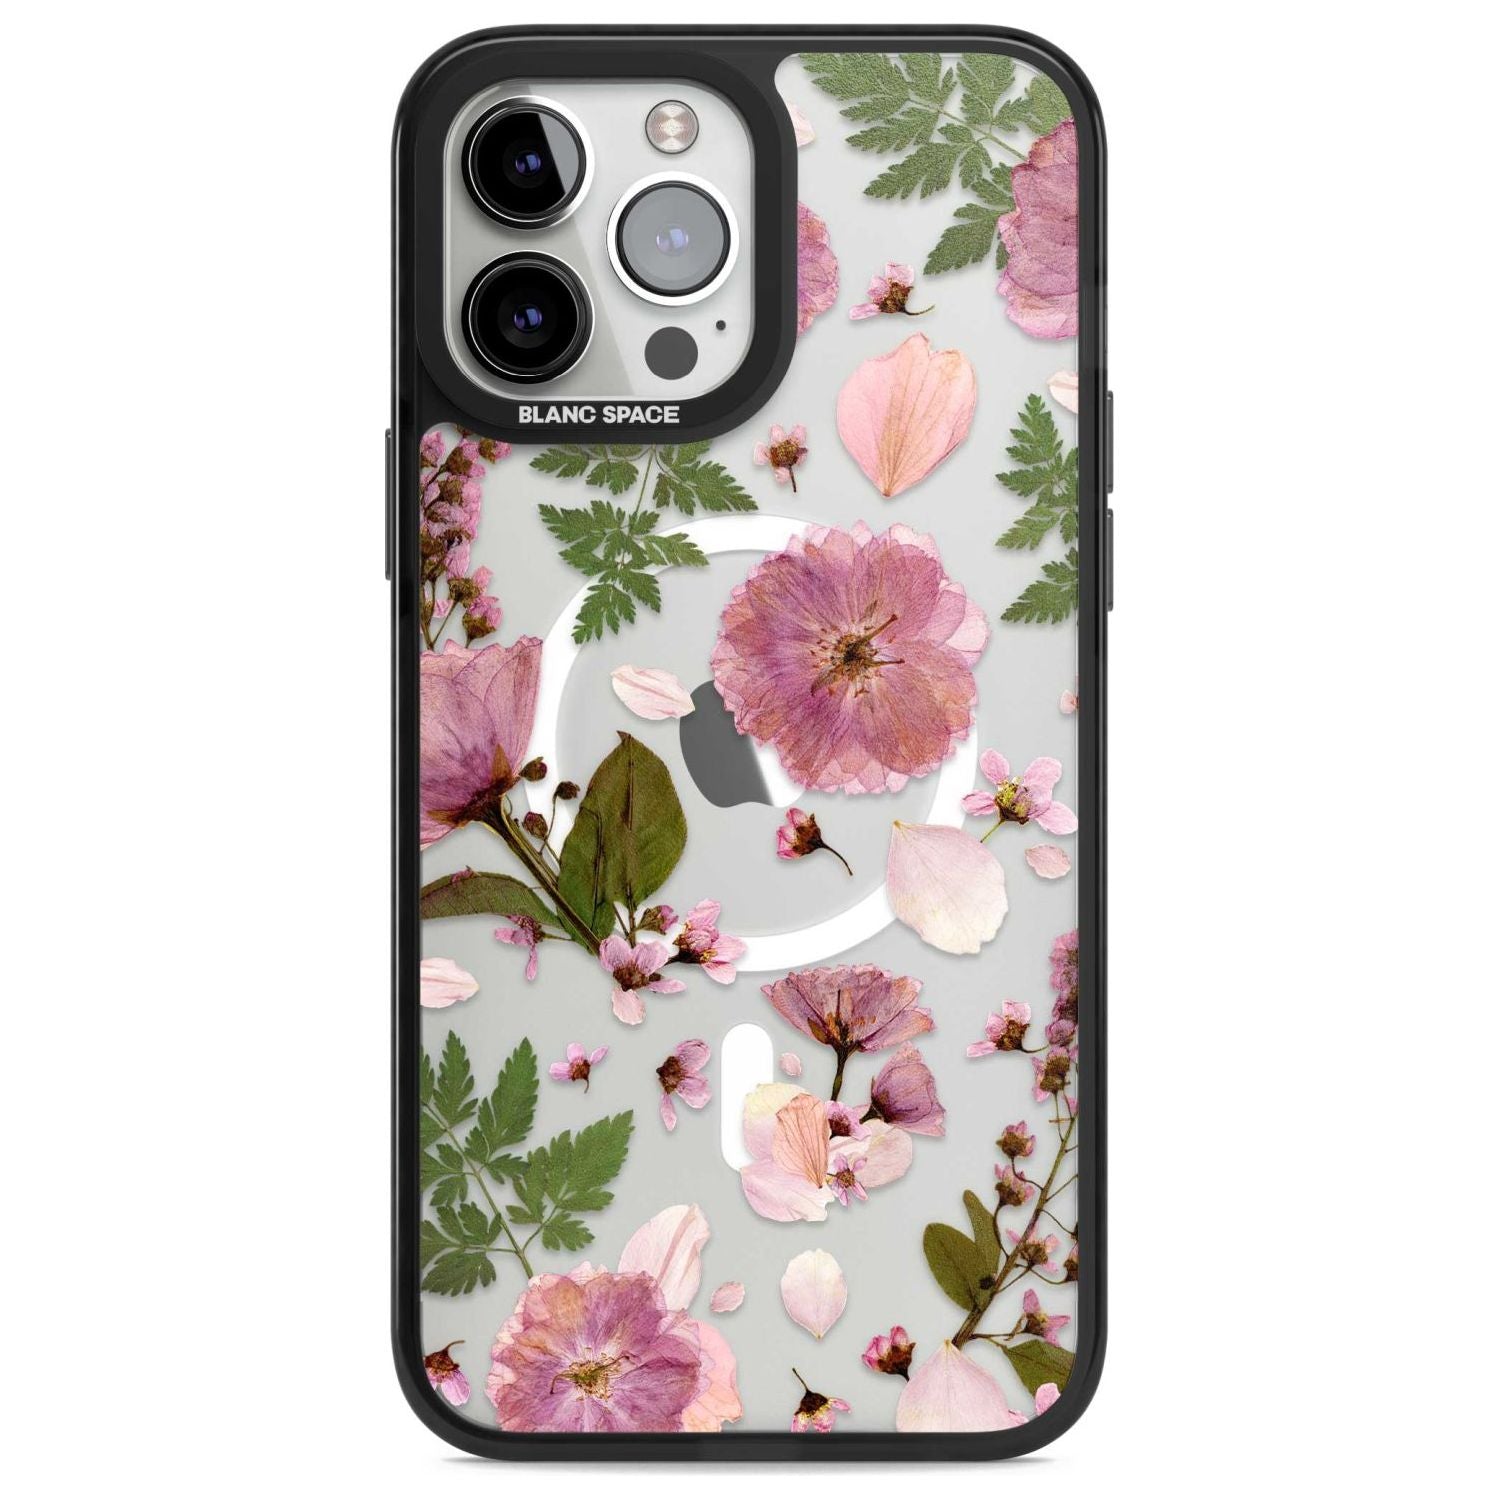 Natural Arrangement of Flowers & Leaves Design Phone Case iPhone 13 Pro Max / Magsafe Black Impact Case Blanc Space